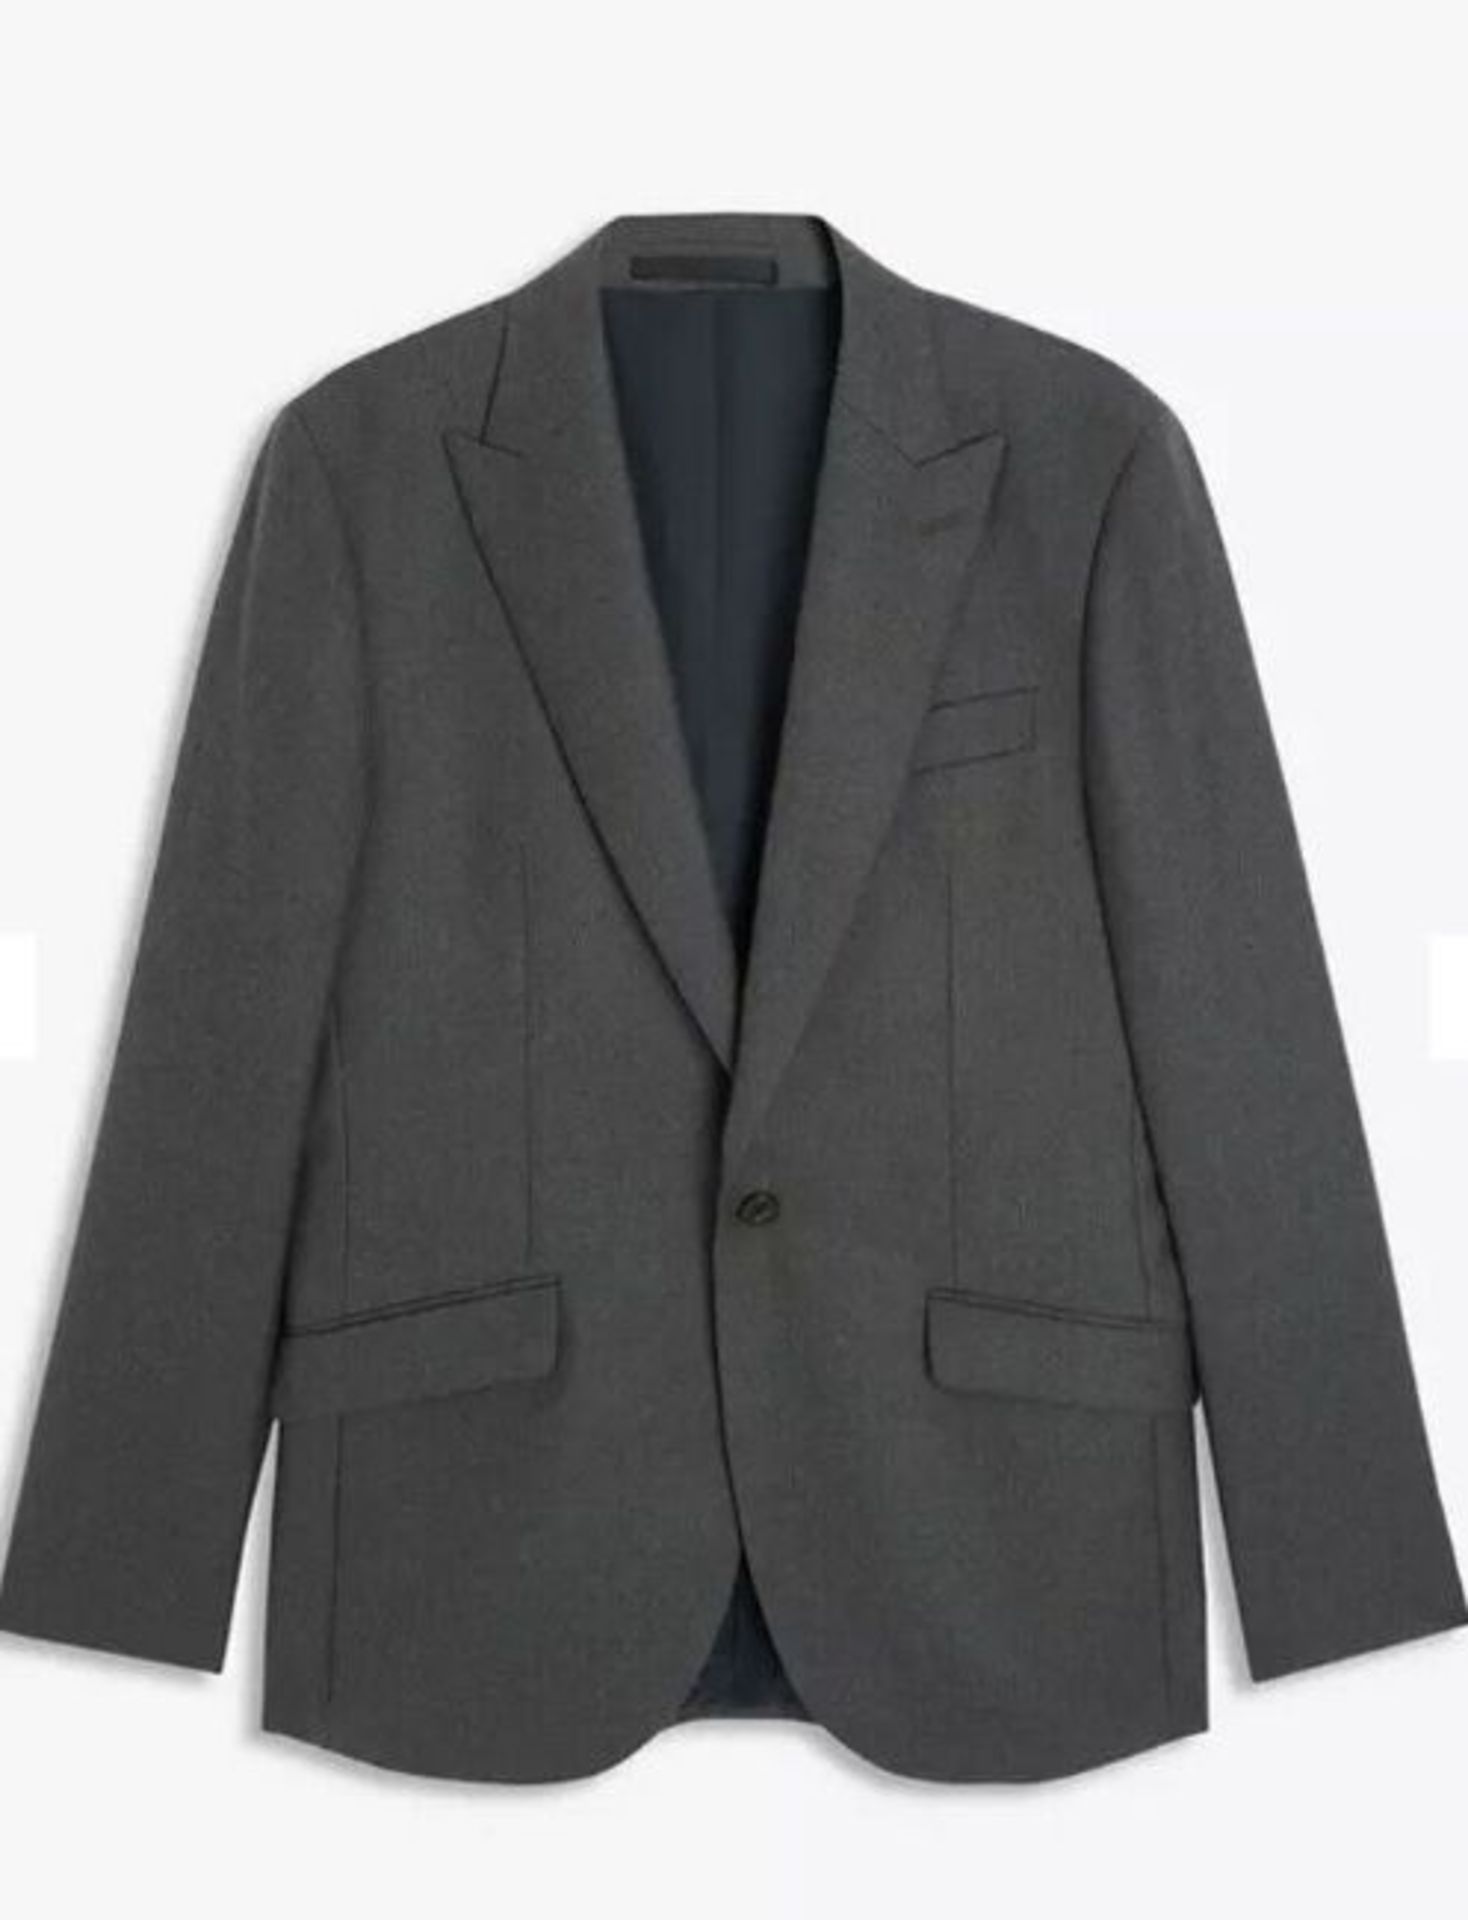 John Lewis Wool Flannel Regular Fit Suit Jacket, Charcoal Size 40R | RRP £170 - Image 4 of 6